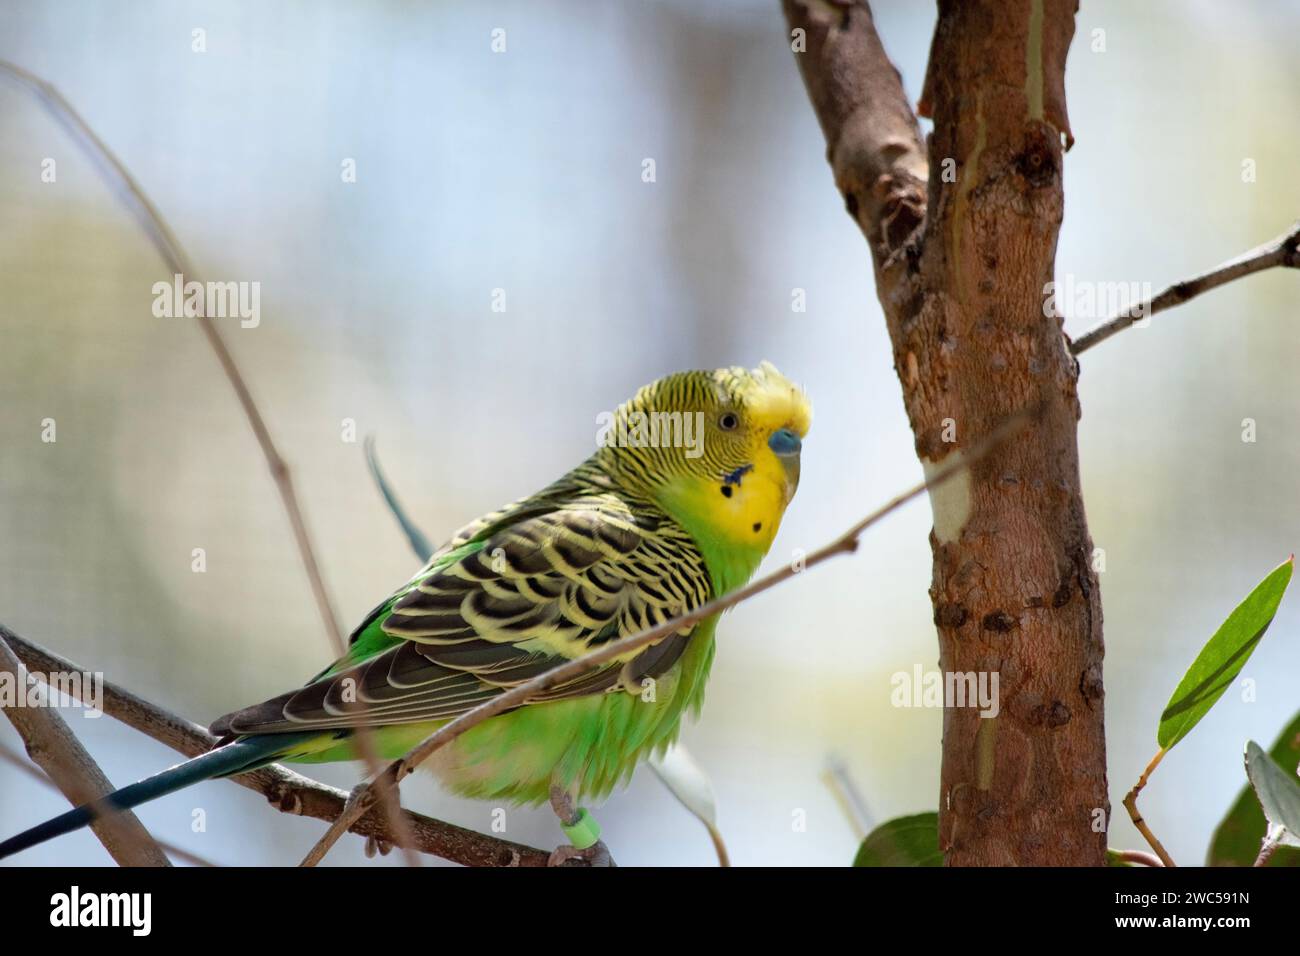 The budgerigar’s plumage is bright yellow and green, with a blue cheek and black scalloping on its wing feathers. Its tail is slender and dark blue. Stock Photo